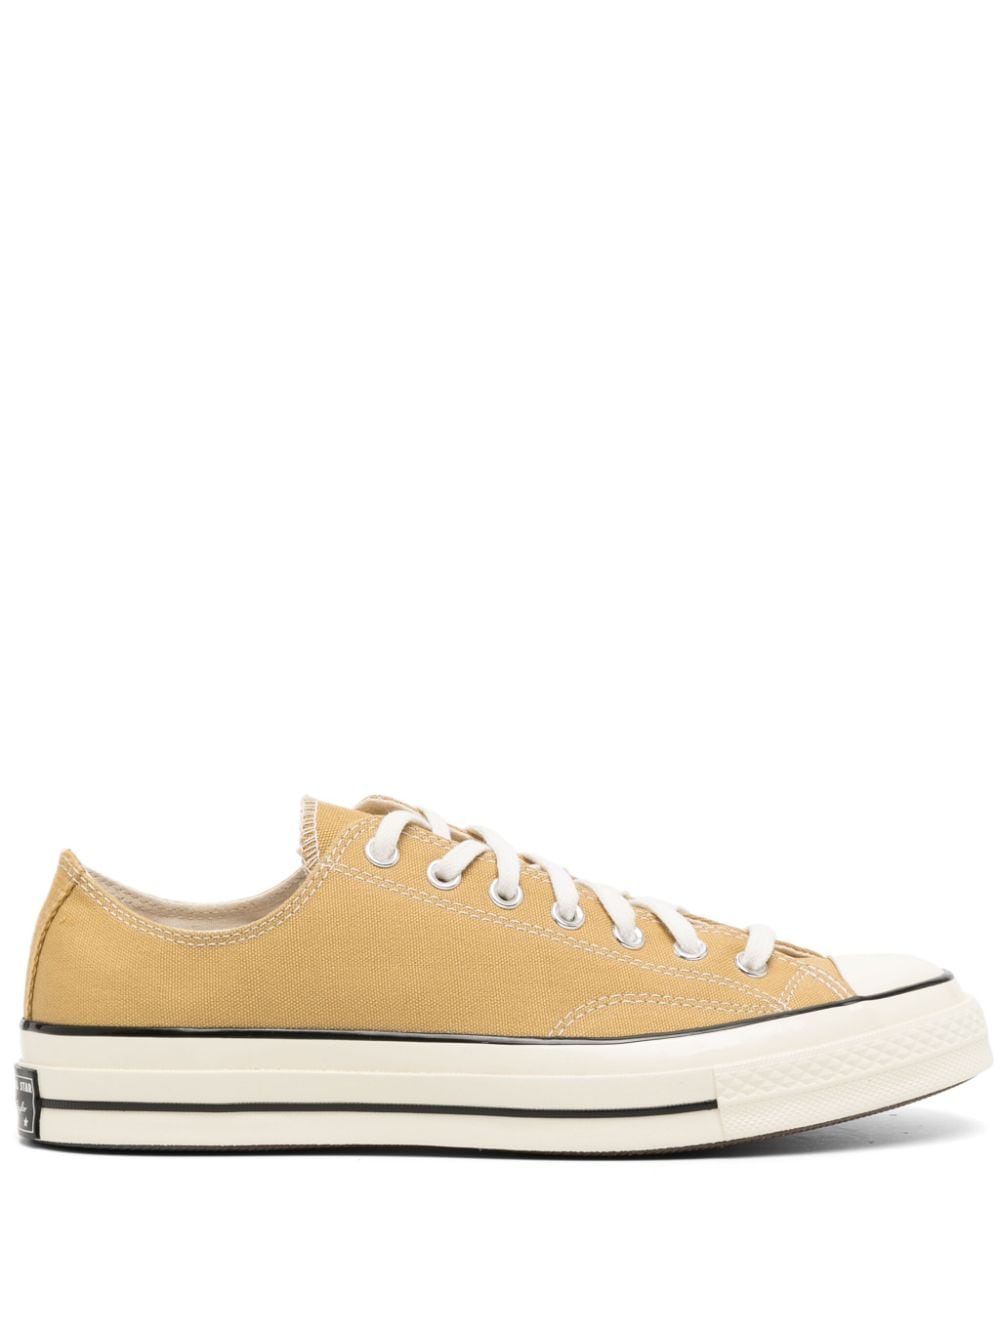 Converse Chuck 70 Low OX sneakers - Yellow von Converse